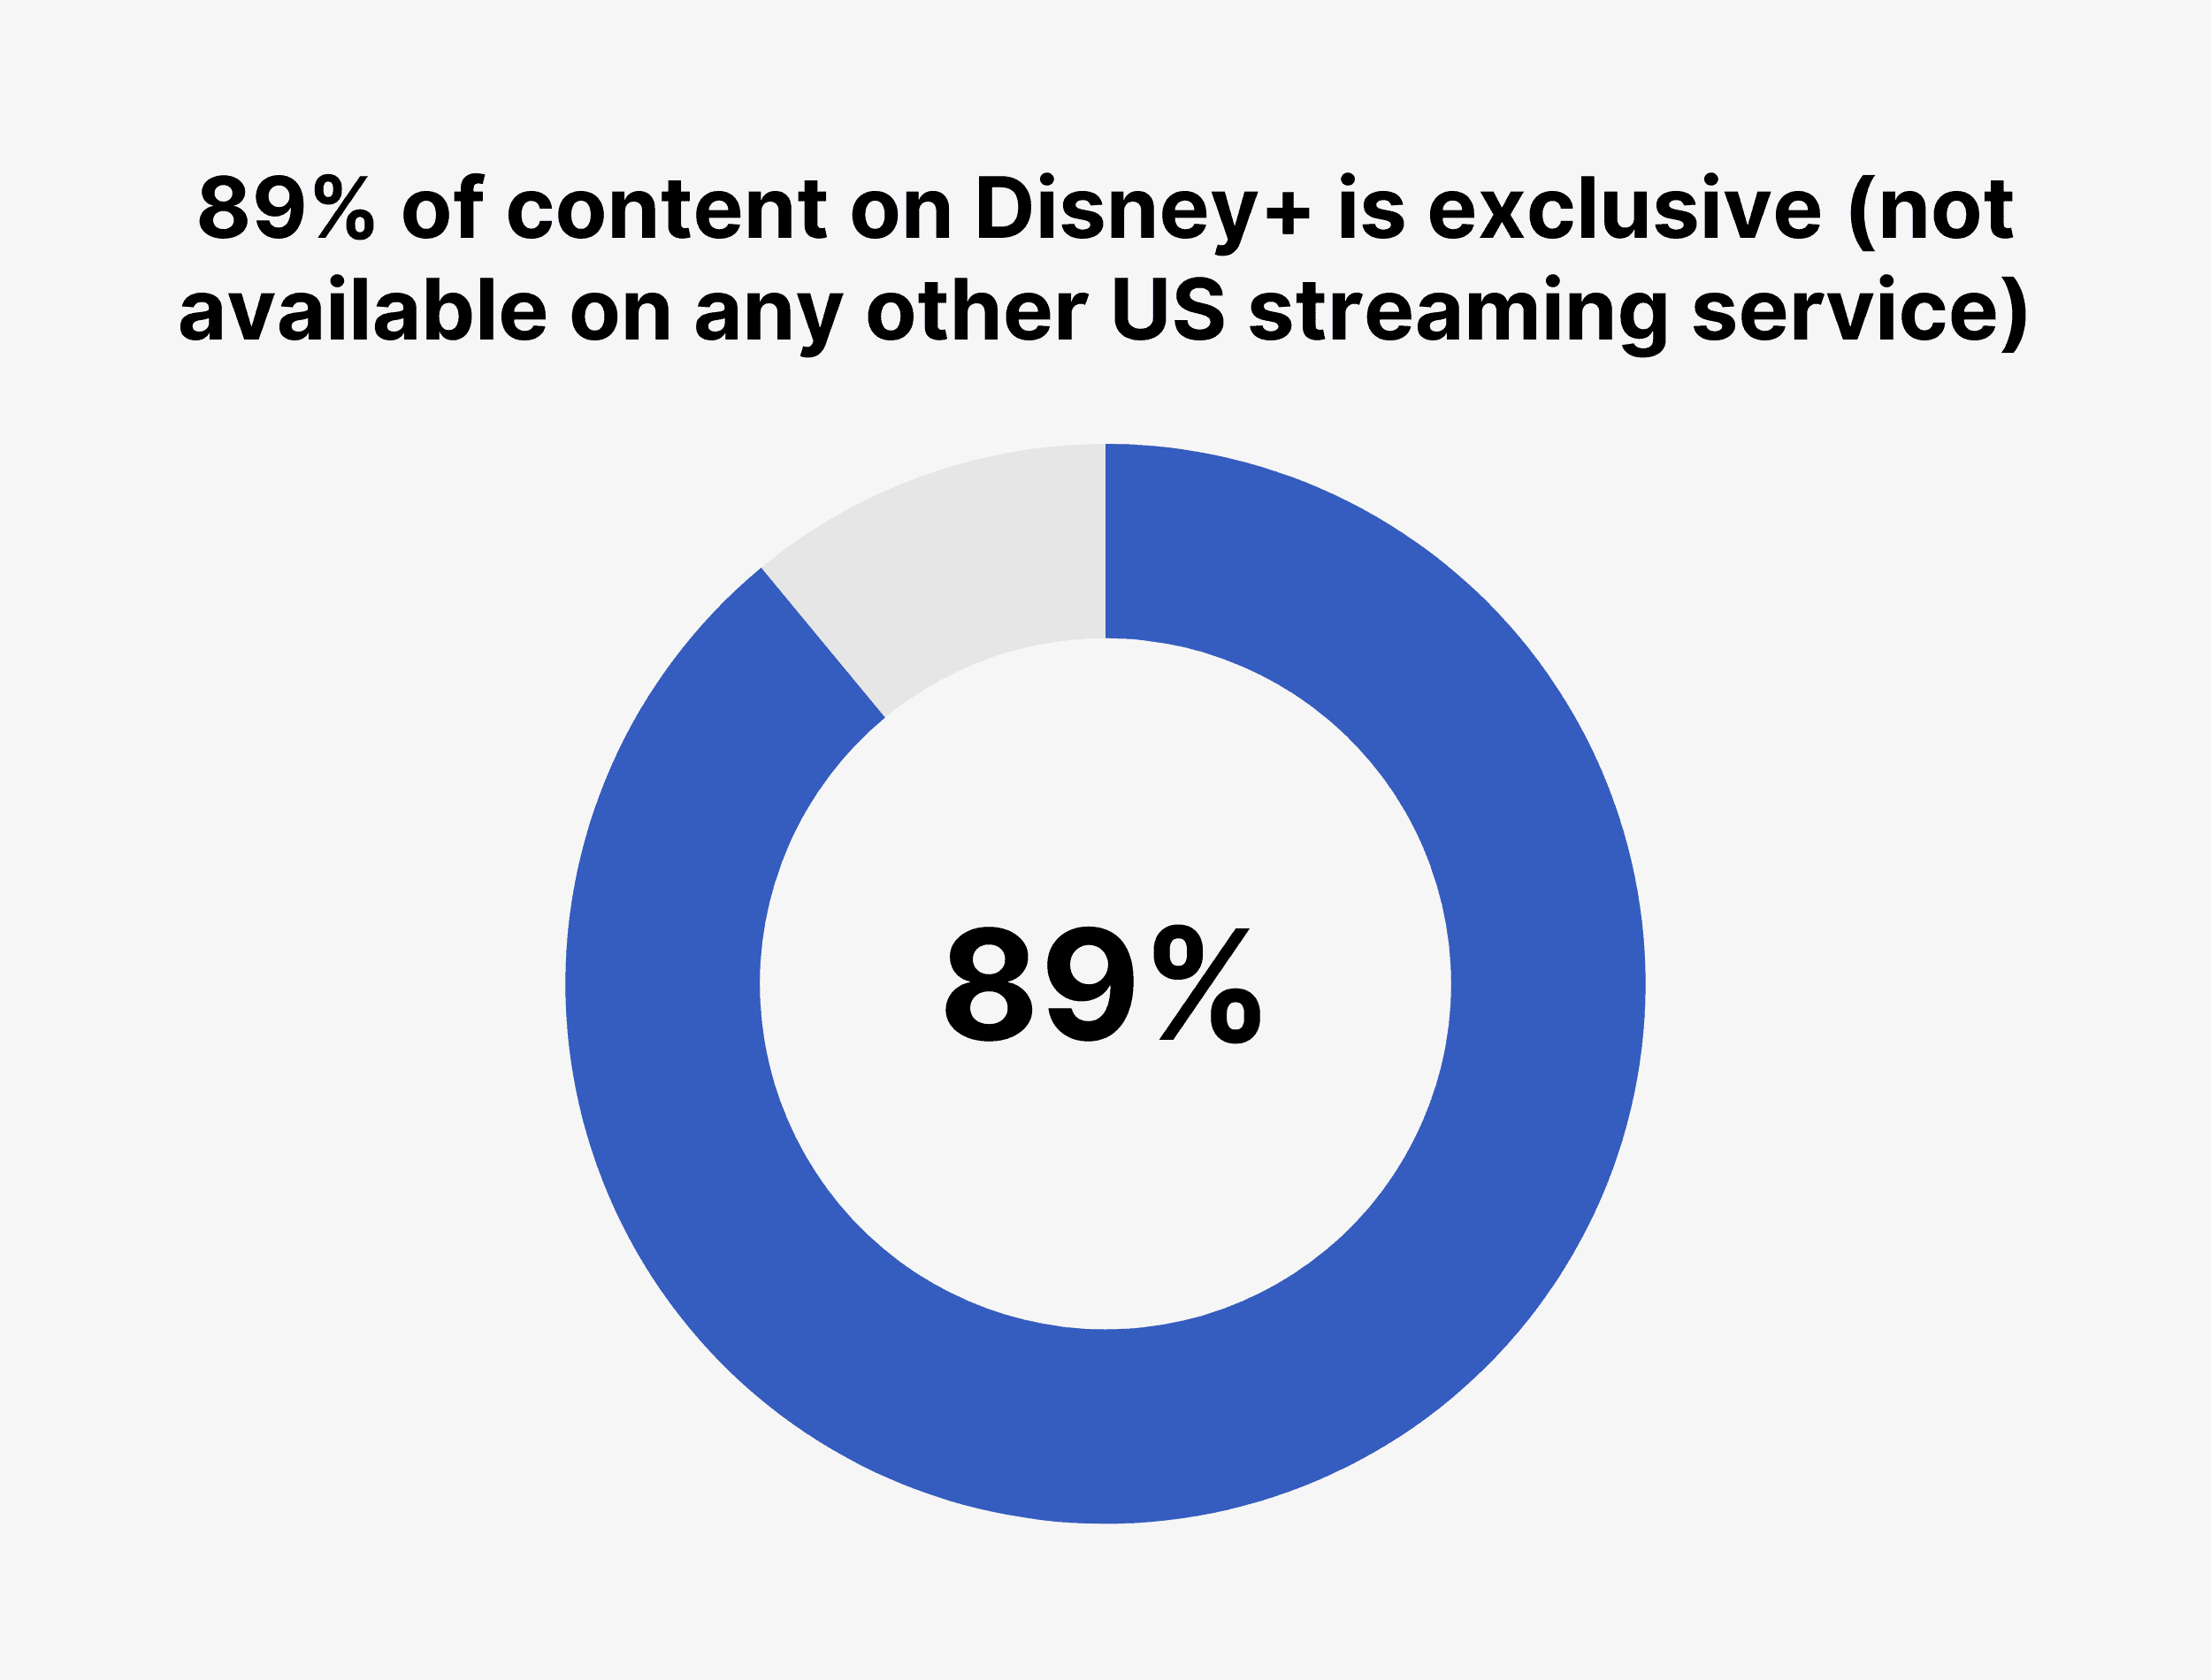 89% of content on Disney+ is exclusive (not available on any other US streaming service)